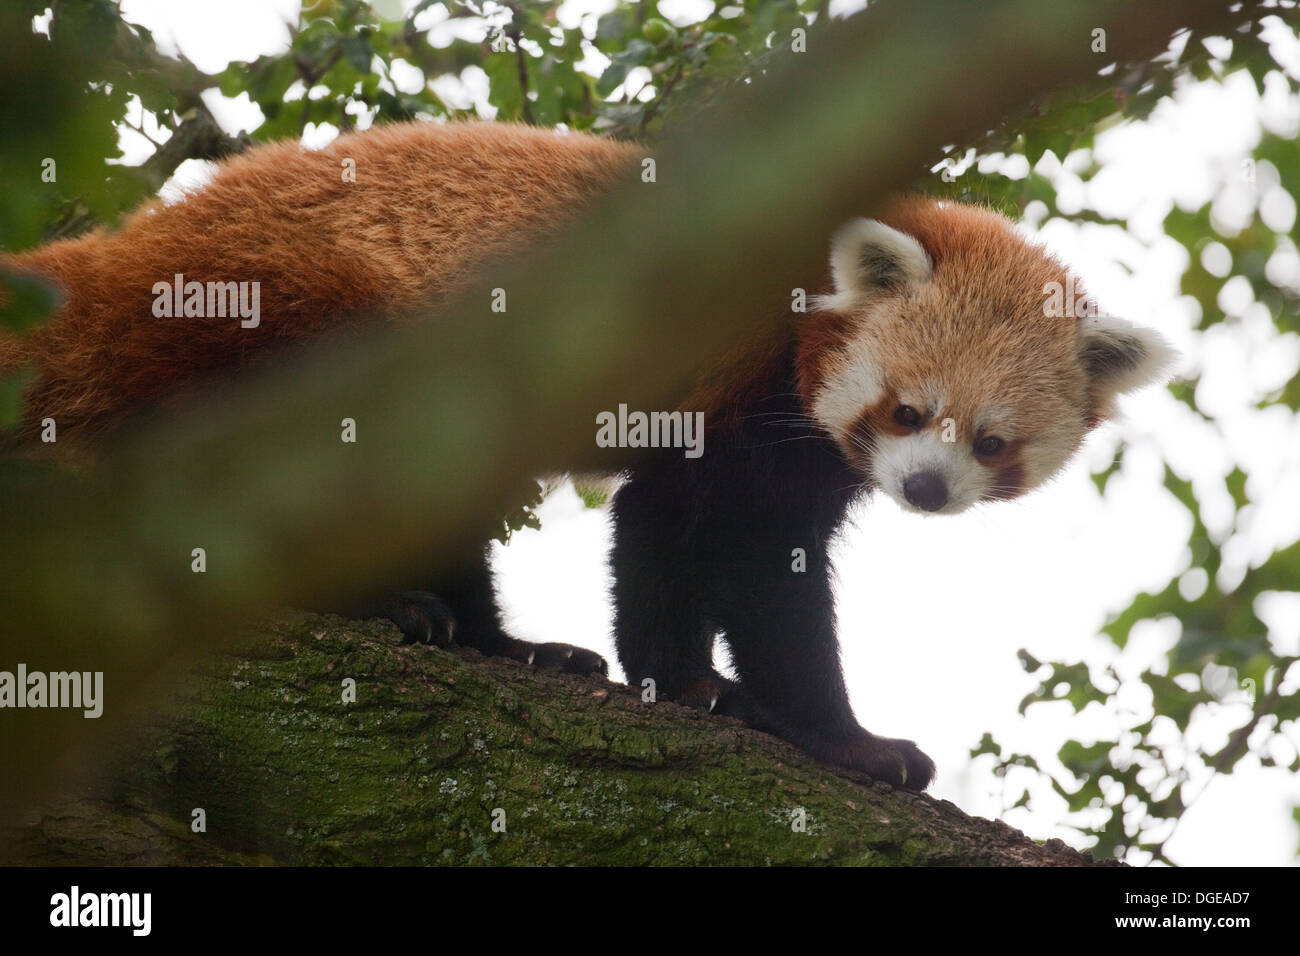 Red or Lesser Panda (Ailurius fulgens). Looking down from limb of a tree. Stock Photo